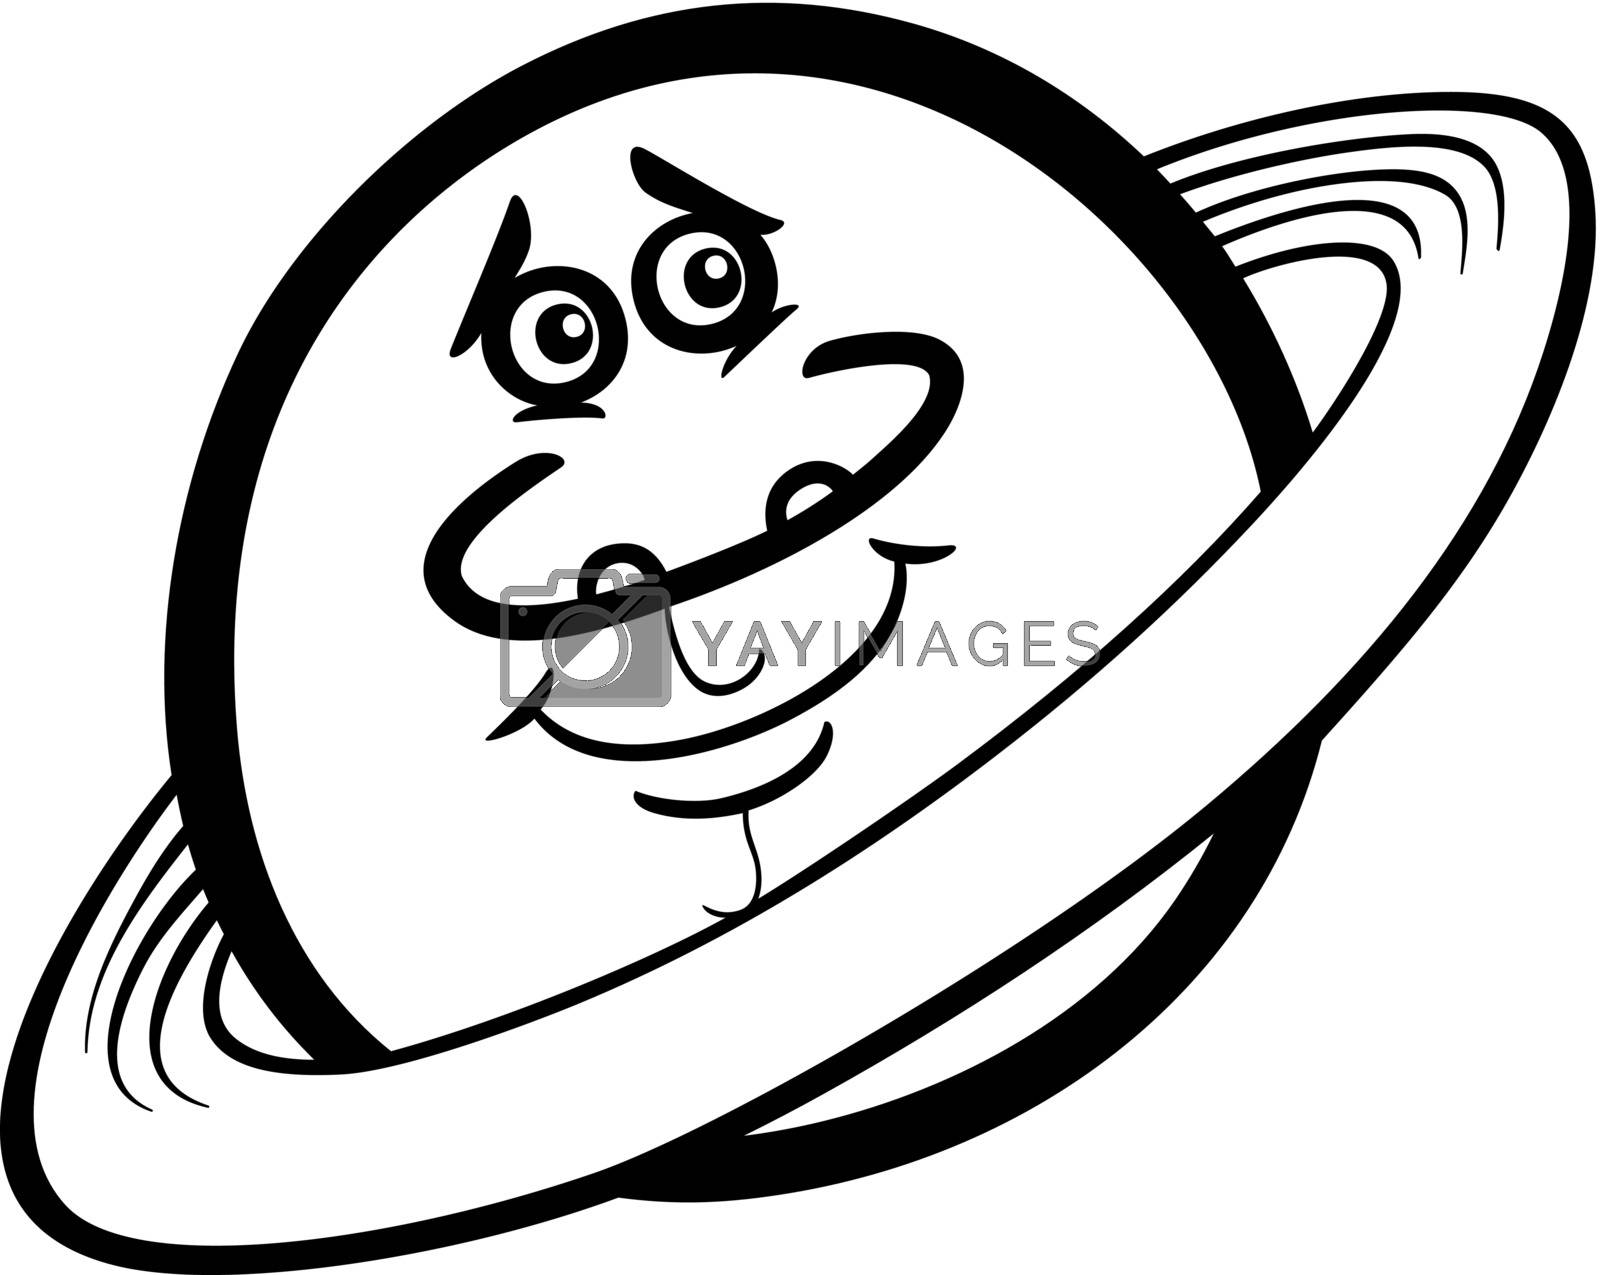 Royalty Free Vector | saturn planet cartoon coloring page by izakowski